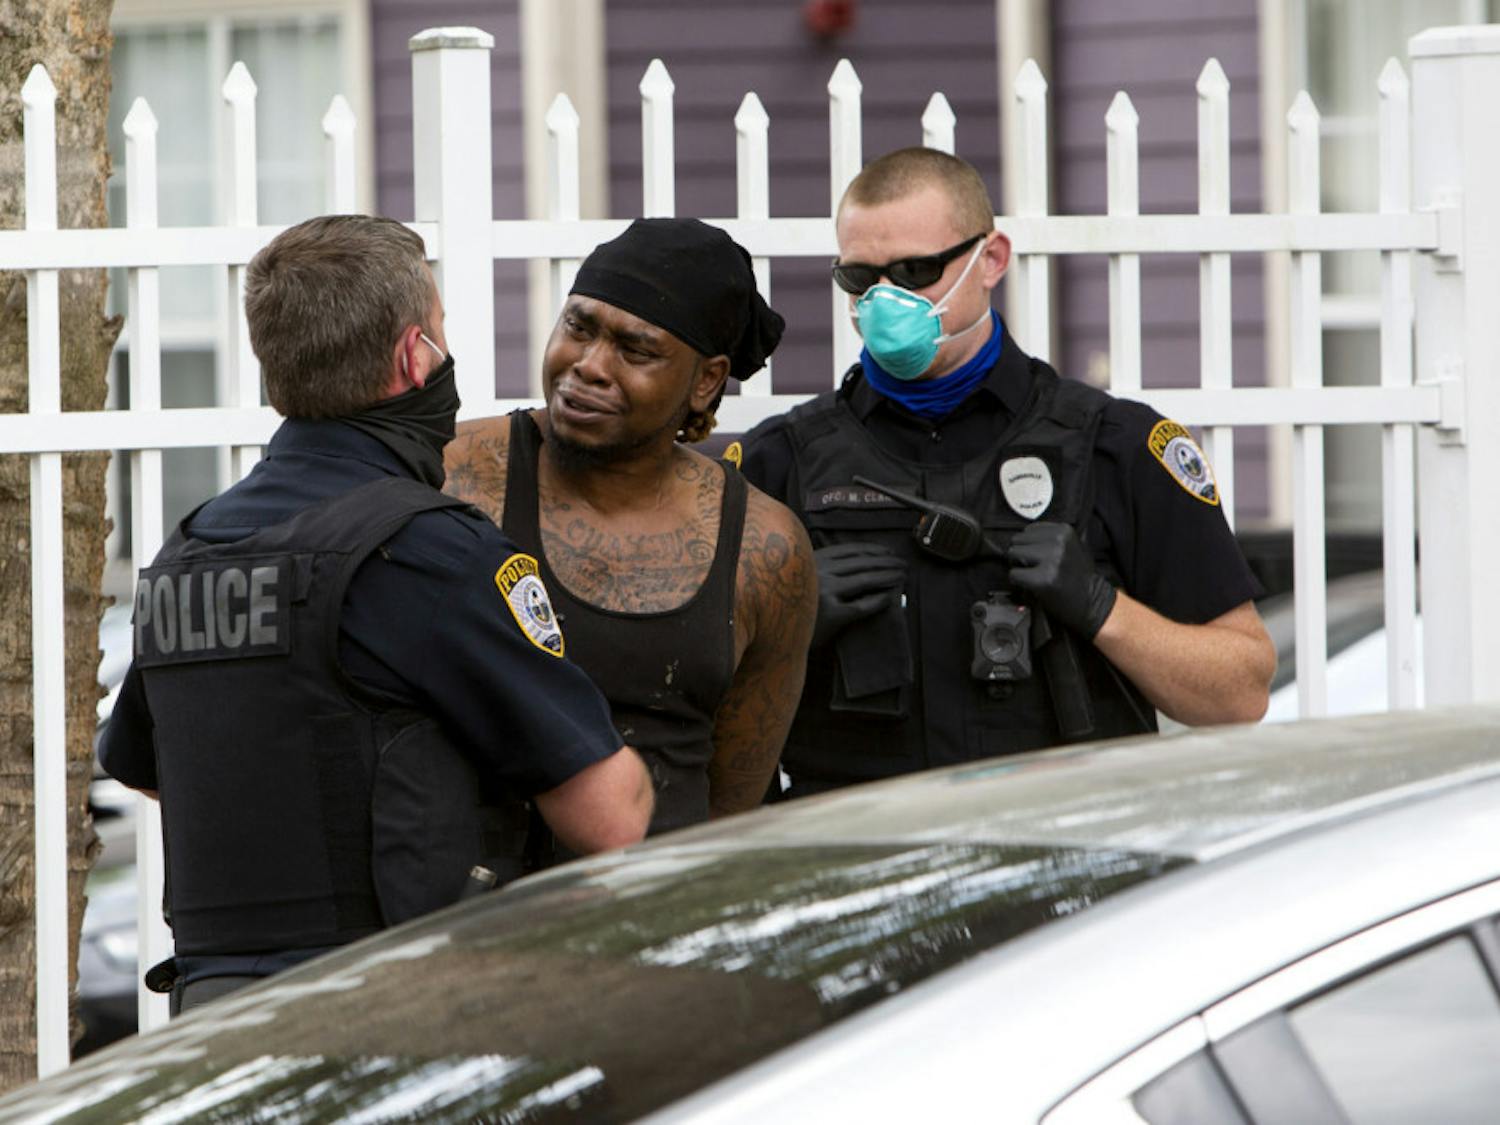 Allen Strawder, 31, is arrested by Gainesville Police Department officers on April 8, 2020, in downtown Gainesville&nbsp;and is accused of battery.&nbsp;Strawder was given a mask to wear in the back of the police vehicle. GPD is following Centers for Disease Control guidelines on interaction with the public, which include recommendations to wear cloth masks, according to spokesperson Sgt. Lisa Scott. There is a stay-at-home order in place in Florida to prevent the spread of COVID-19.